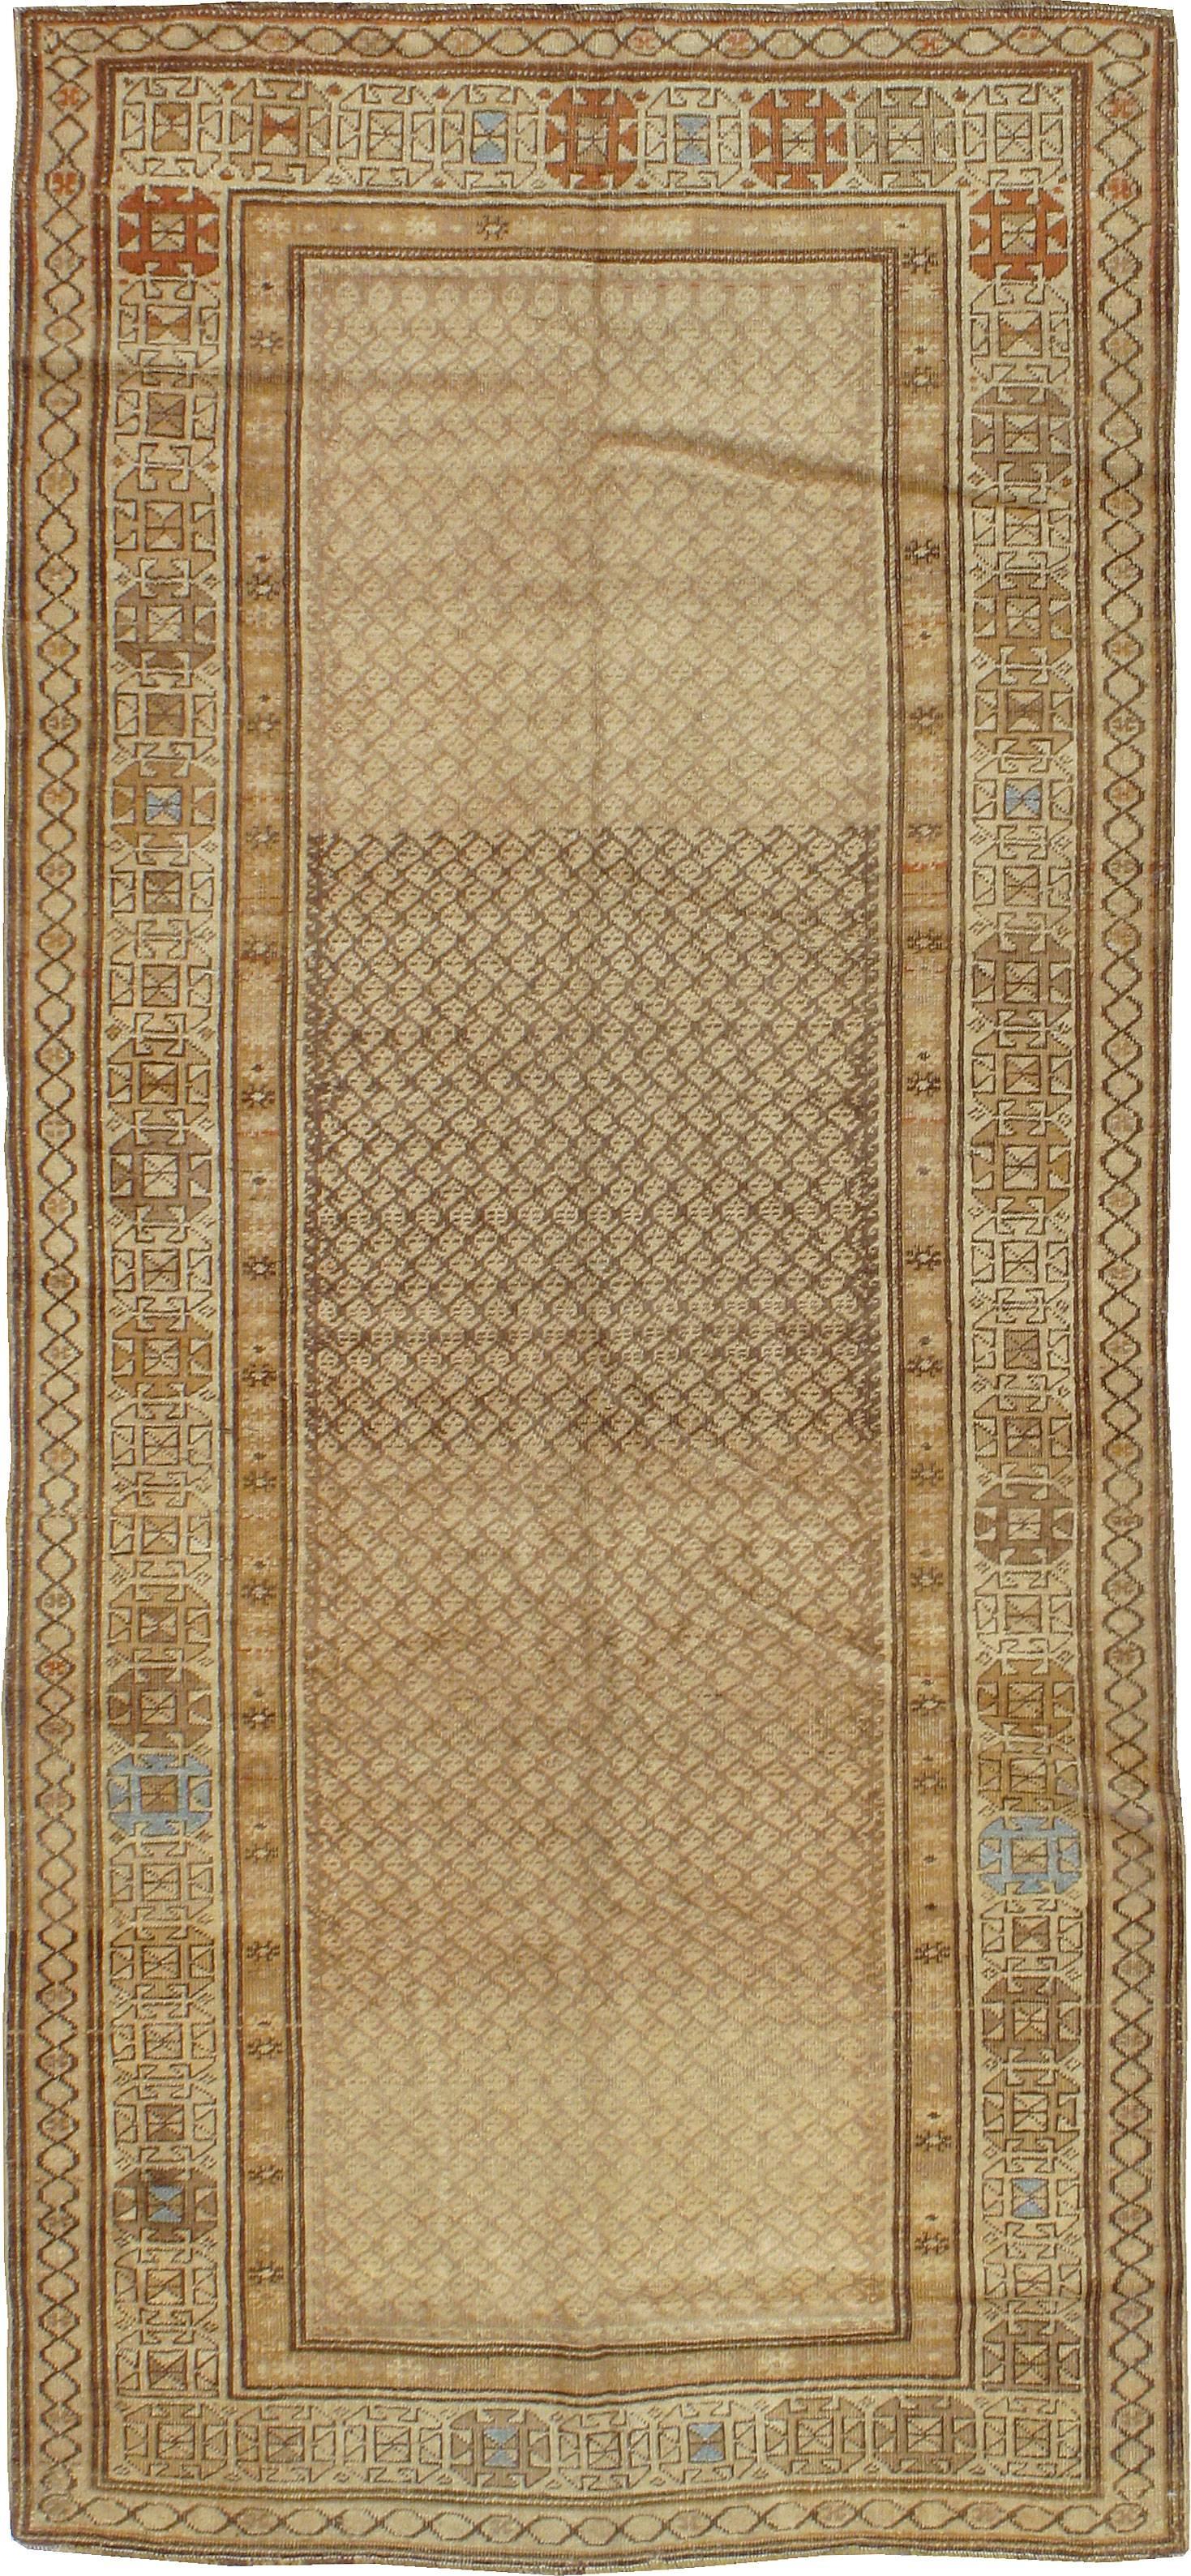 An antique Persian Kurd carpet from the first quarter of the 20th century.